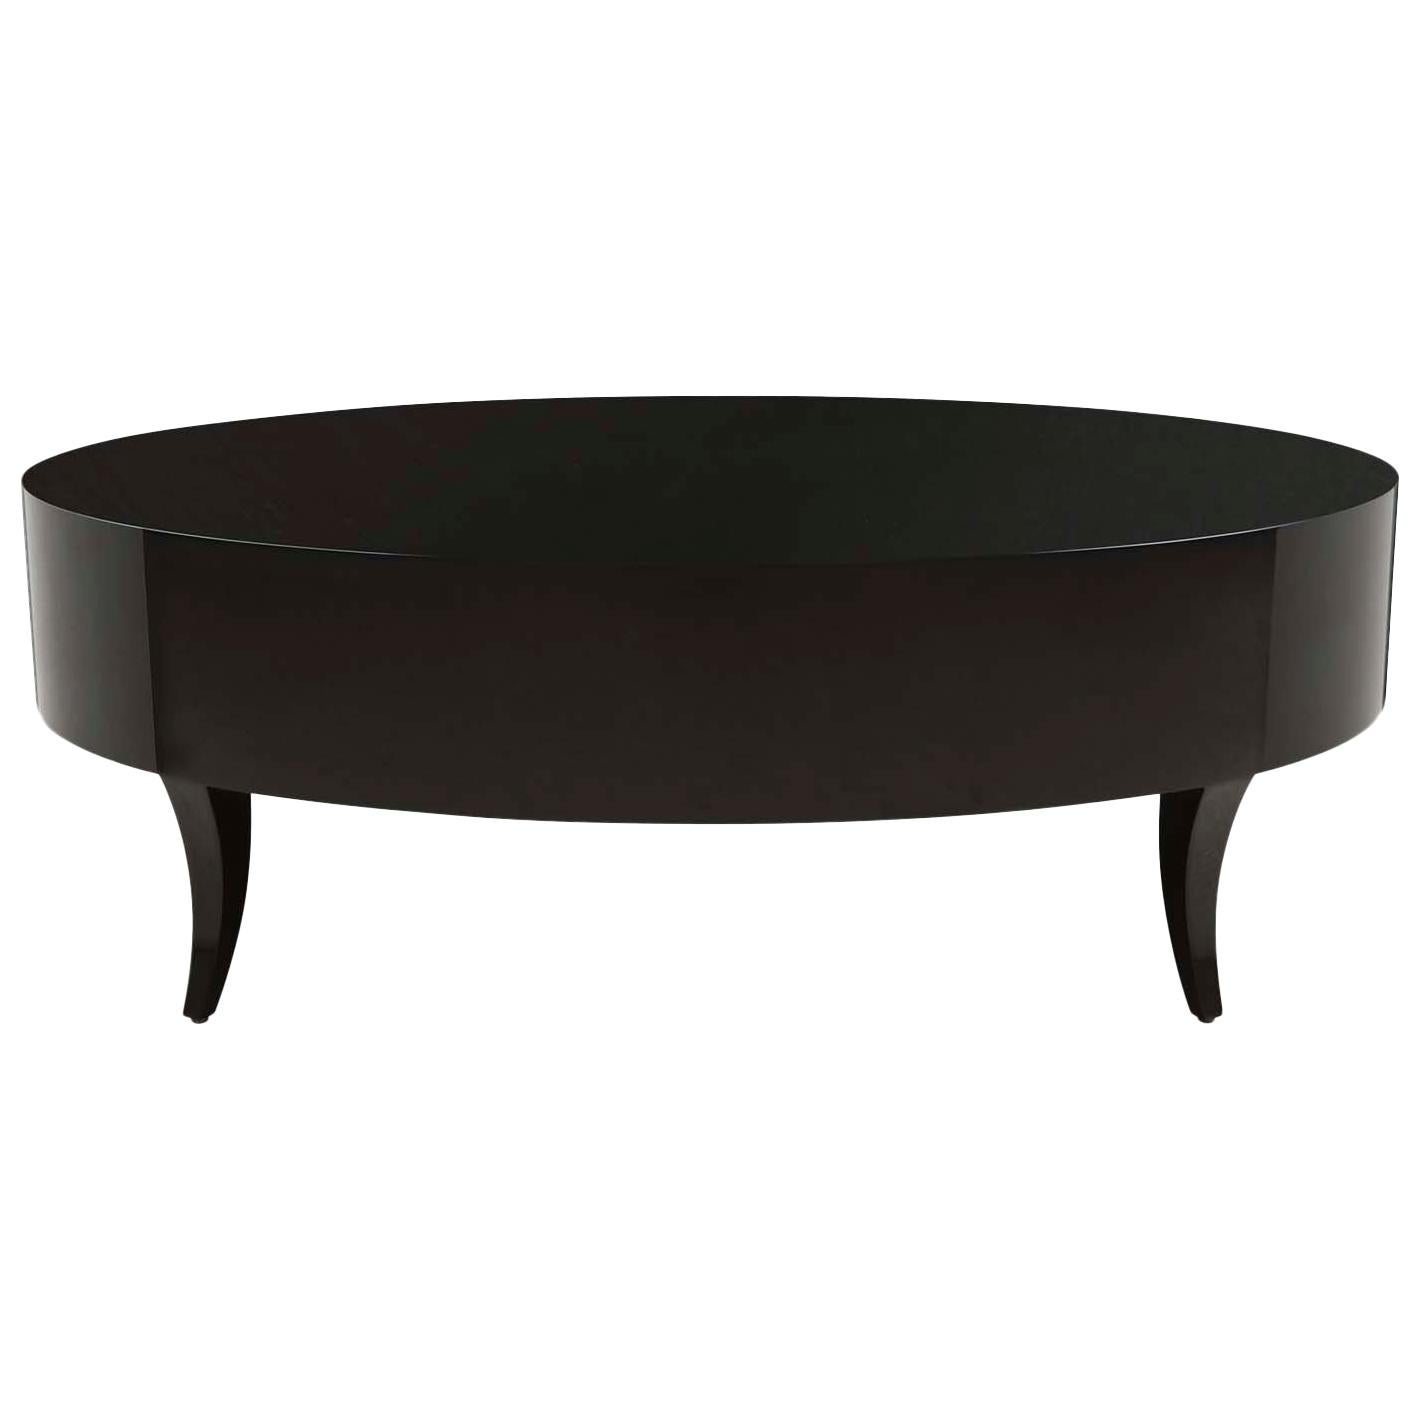 Oval Black Lak Coffee Table For Sale